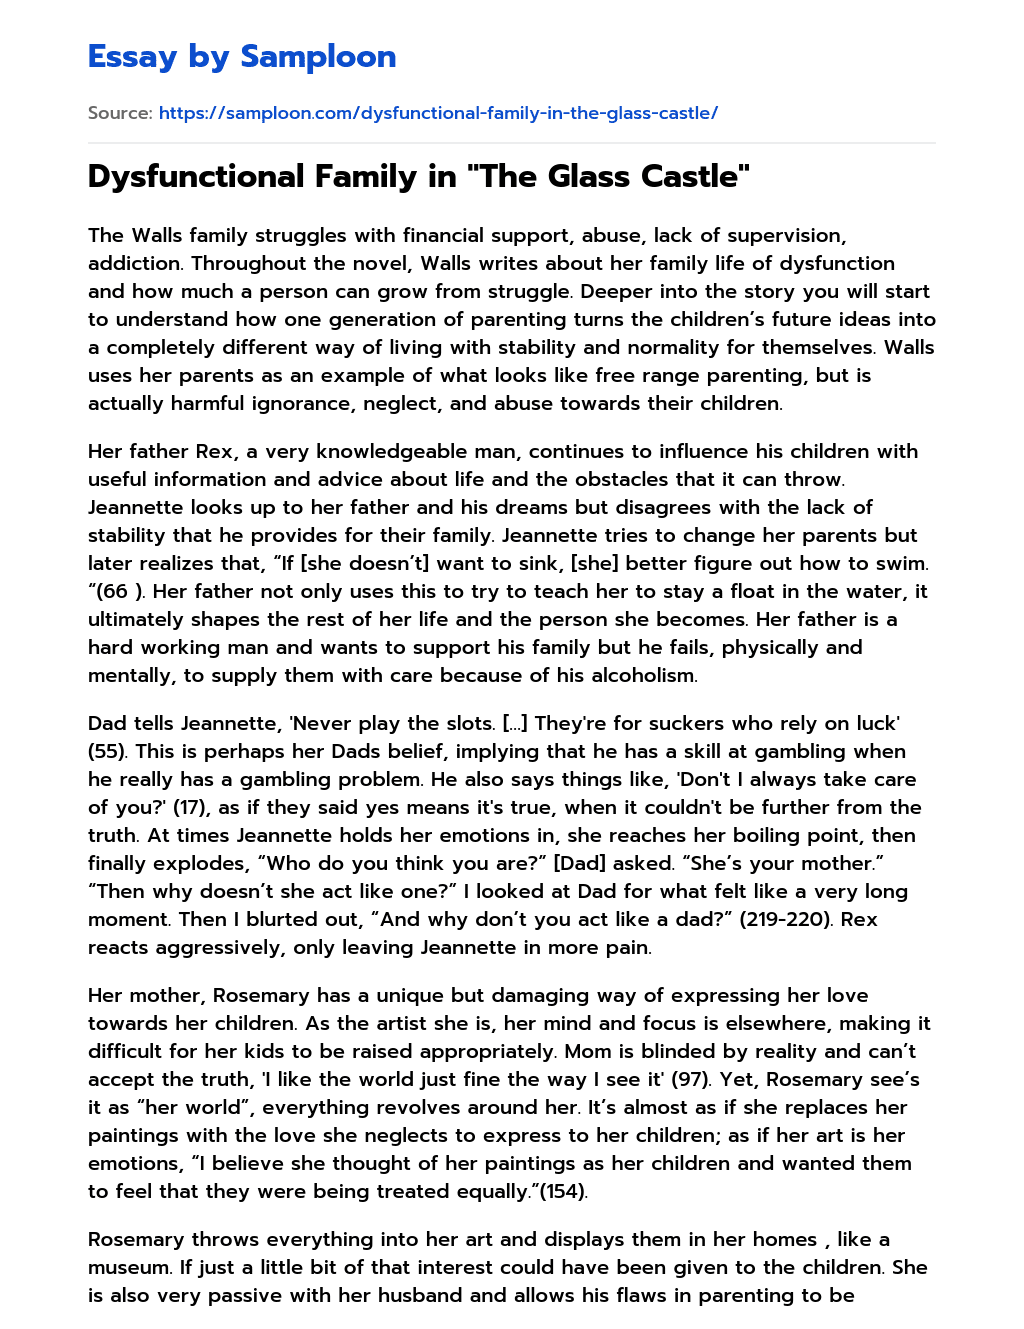 Dysfunctional Family in “The Glass Castle” essay